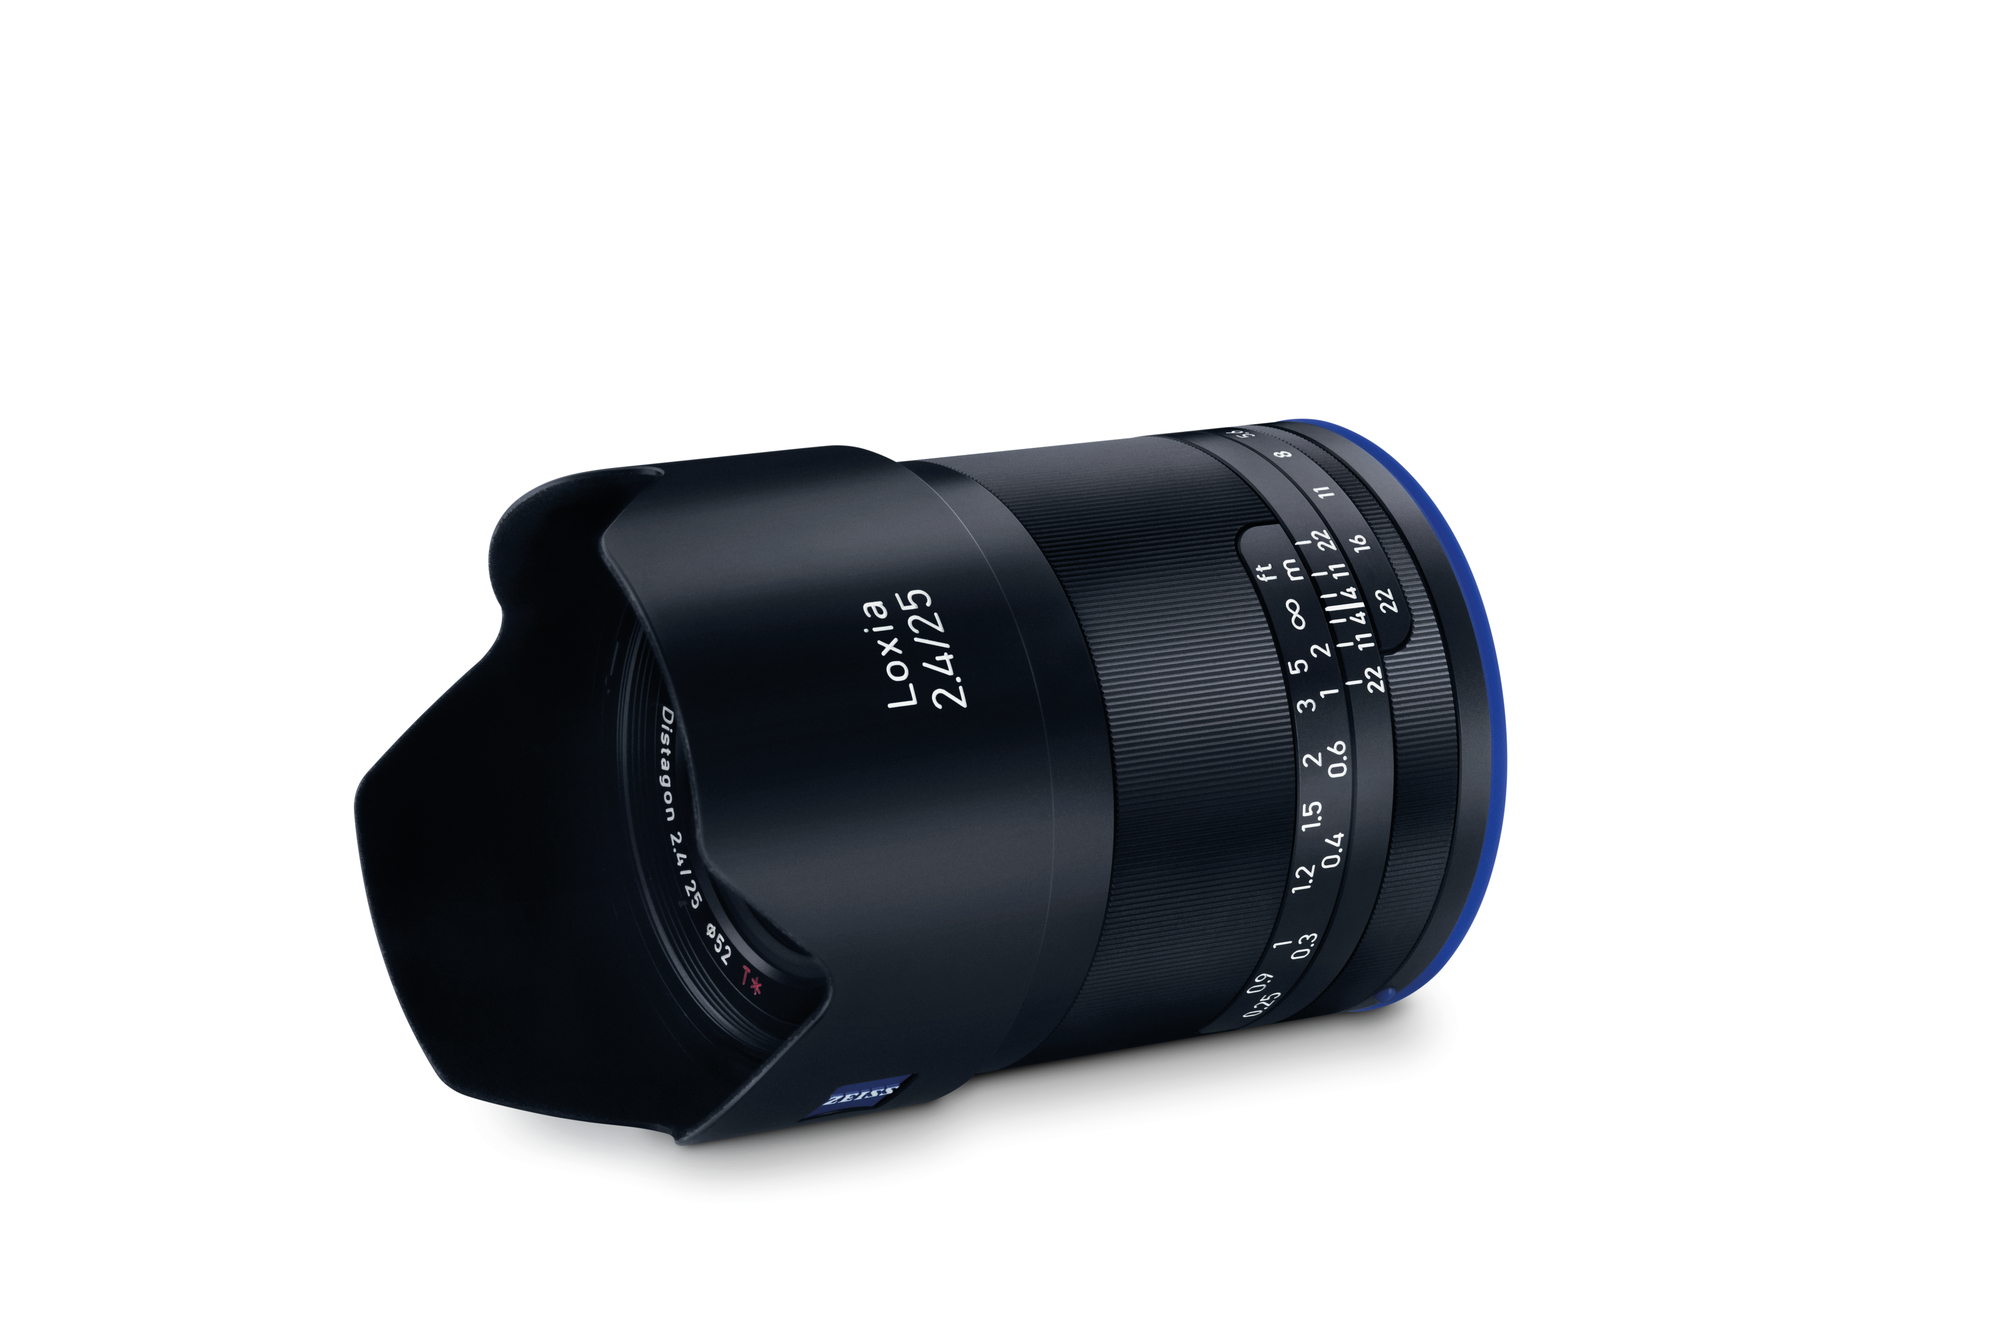 Zeiss announces new Loxia 25mm f/2.4 e-mount lens - Newsshooter